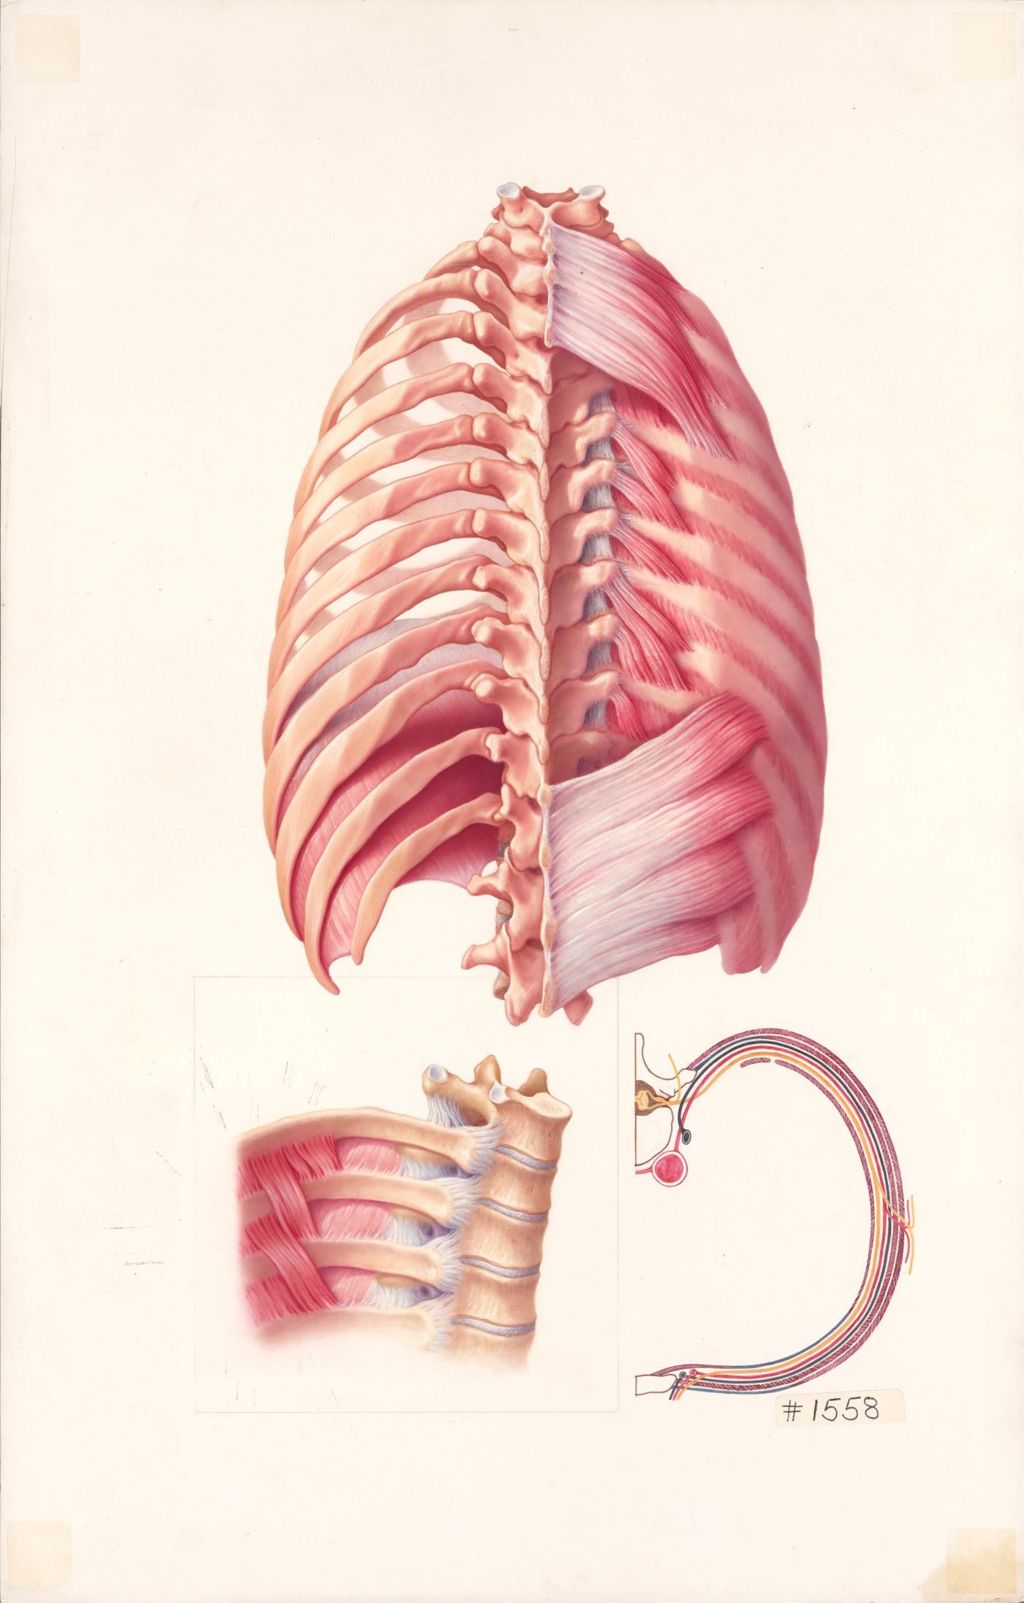 Miniature of Medical Profiles, Plate II, The Anatomical Disposition of the Thorax, The Thoracic Wall Posterior Aspect